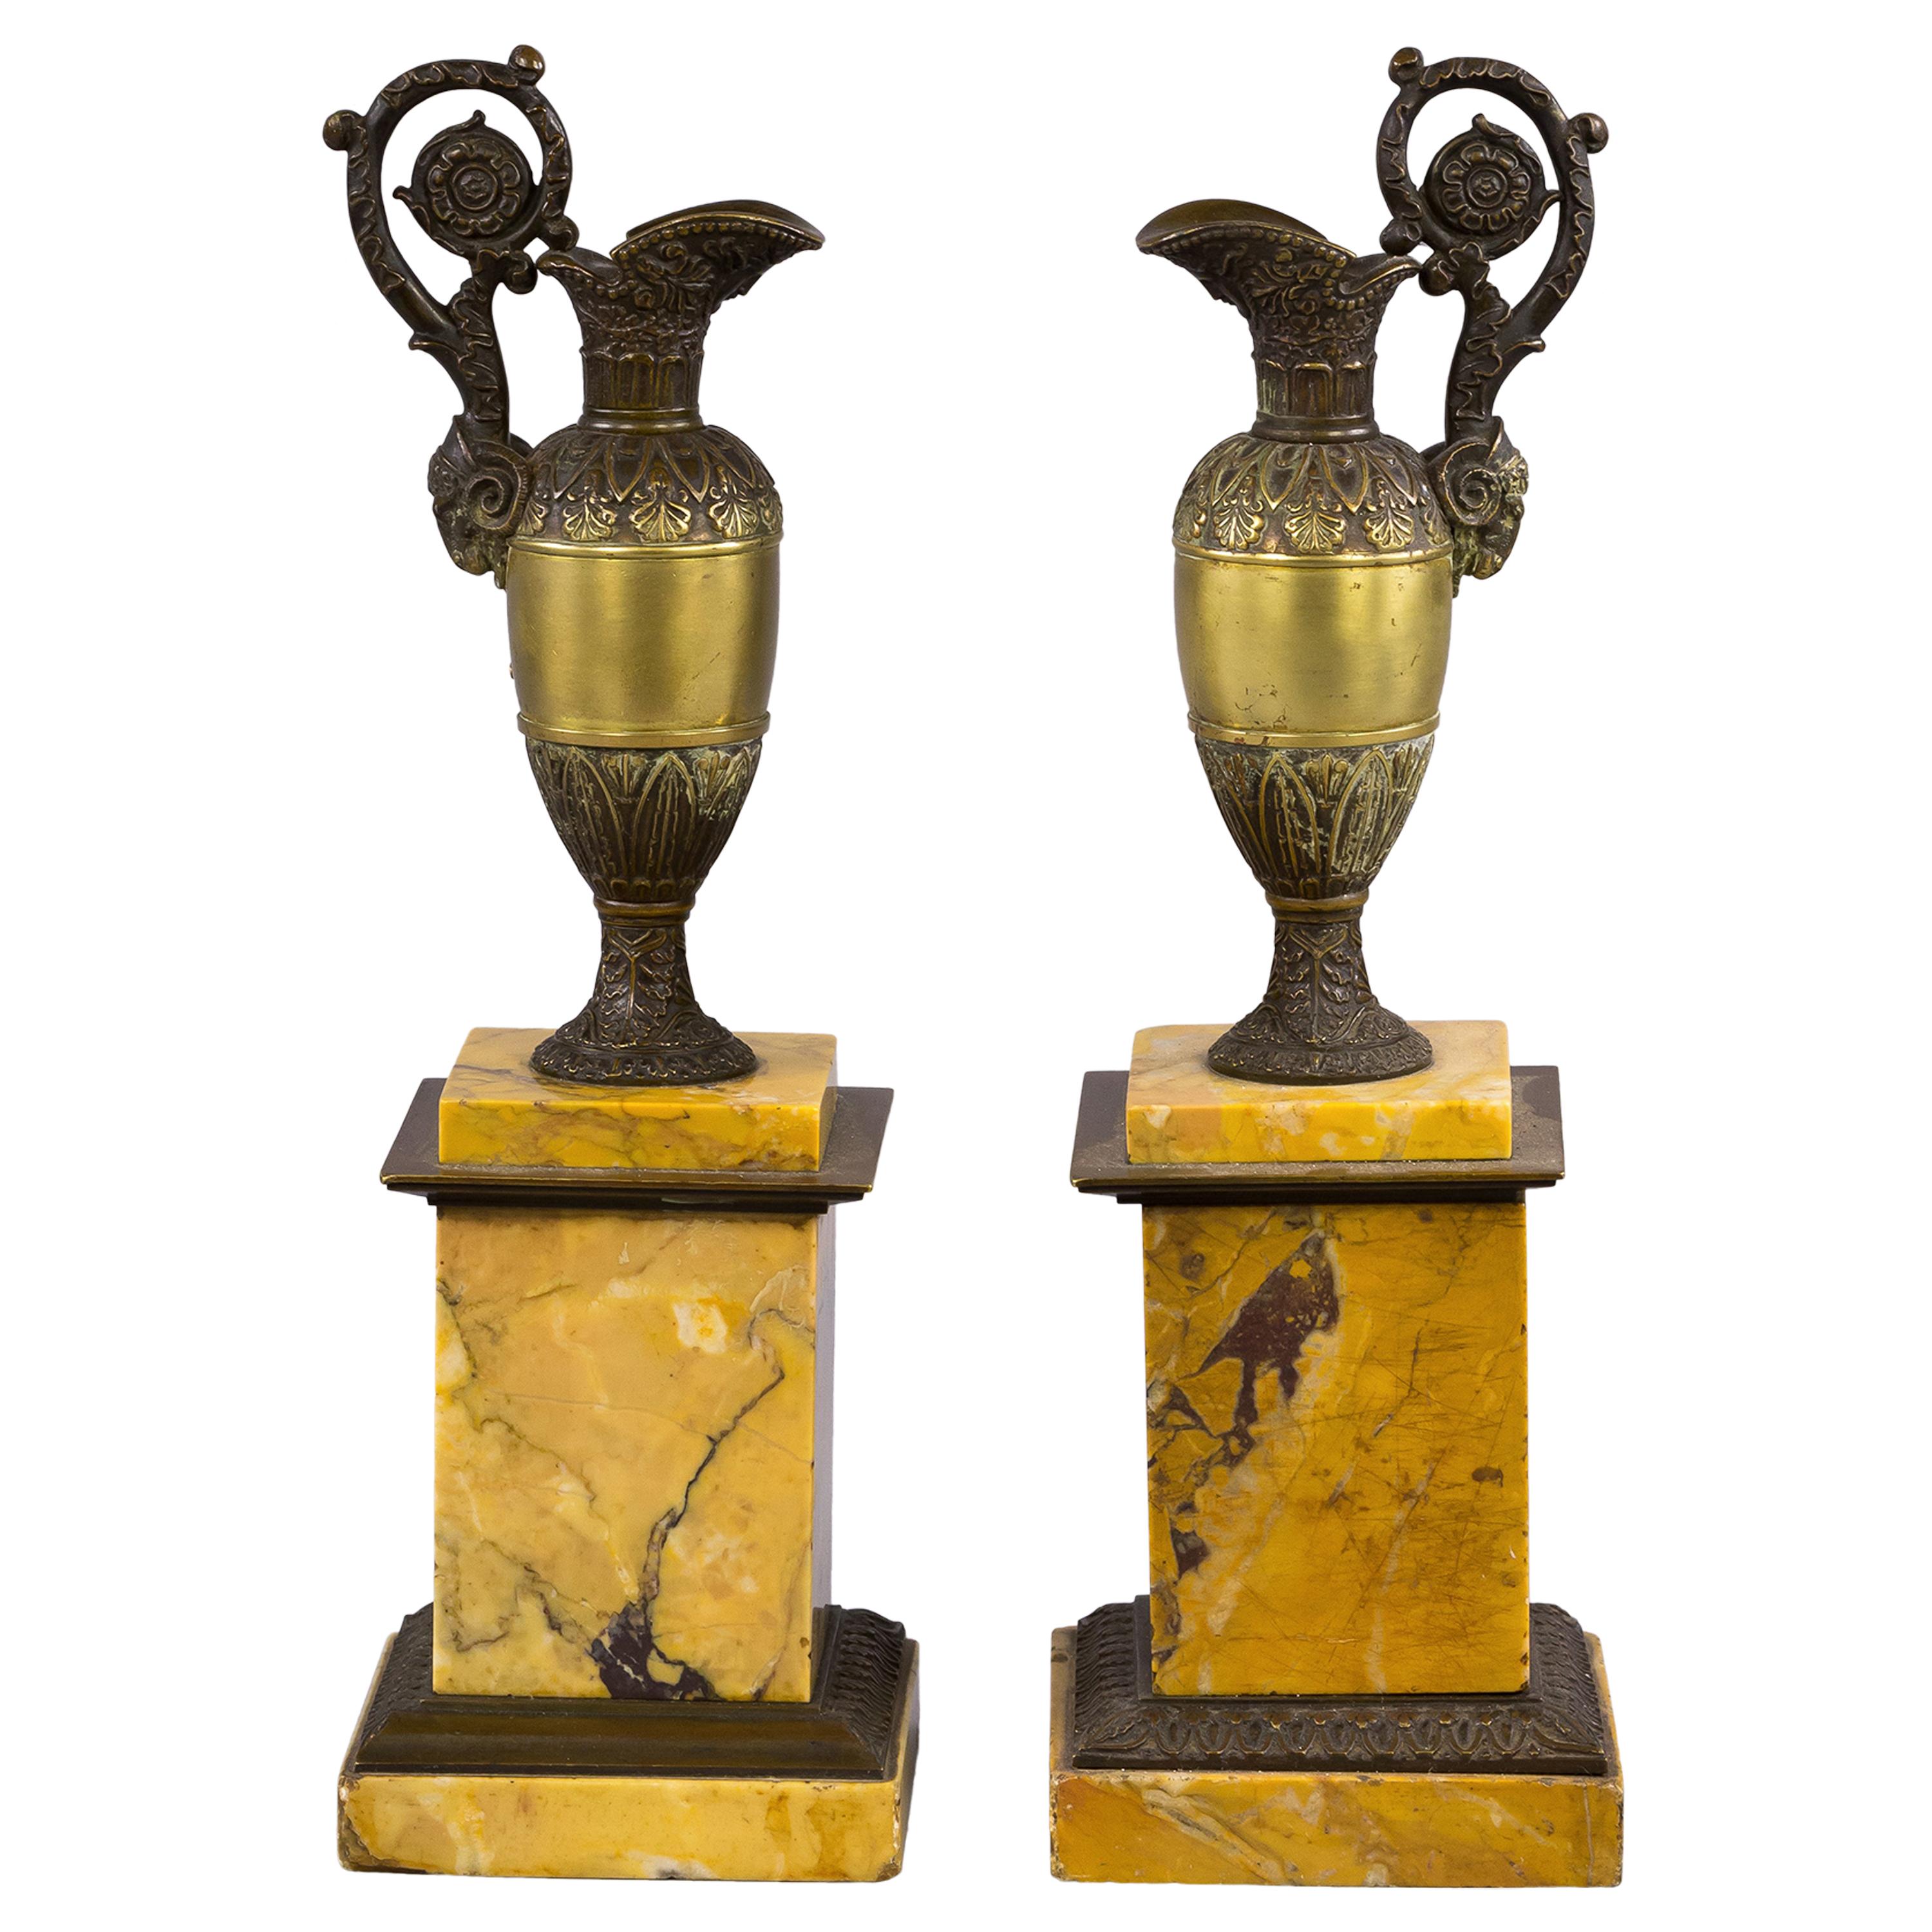 Pair of Gilt and Patinated Bronze Ewers on Marble Plinths, circa 1840